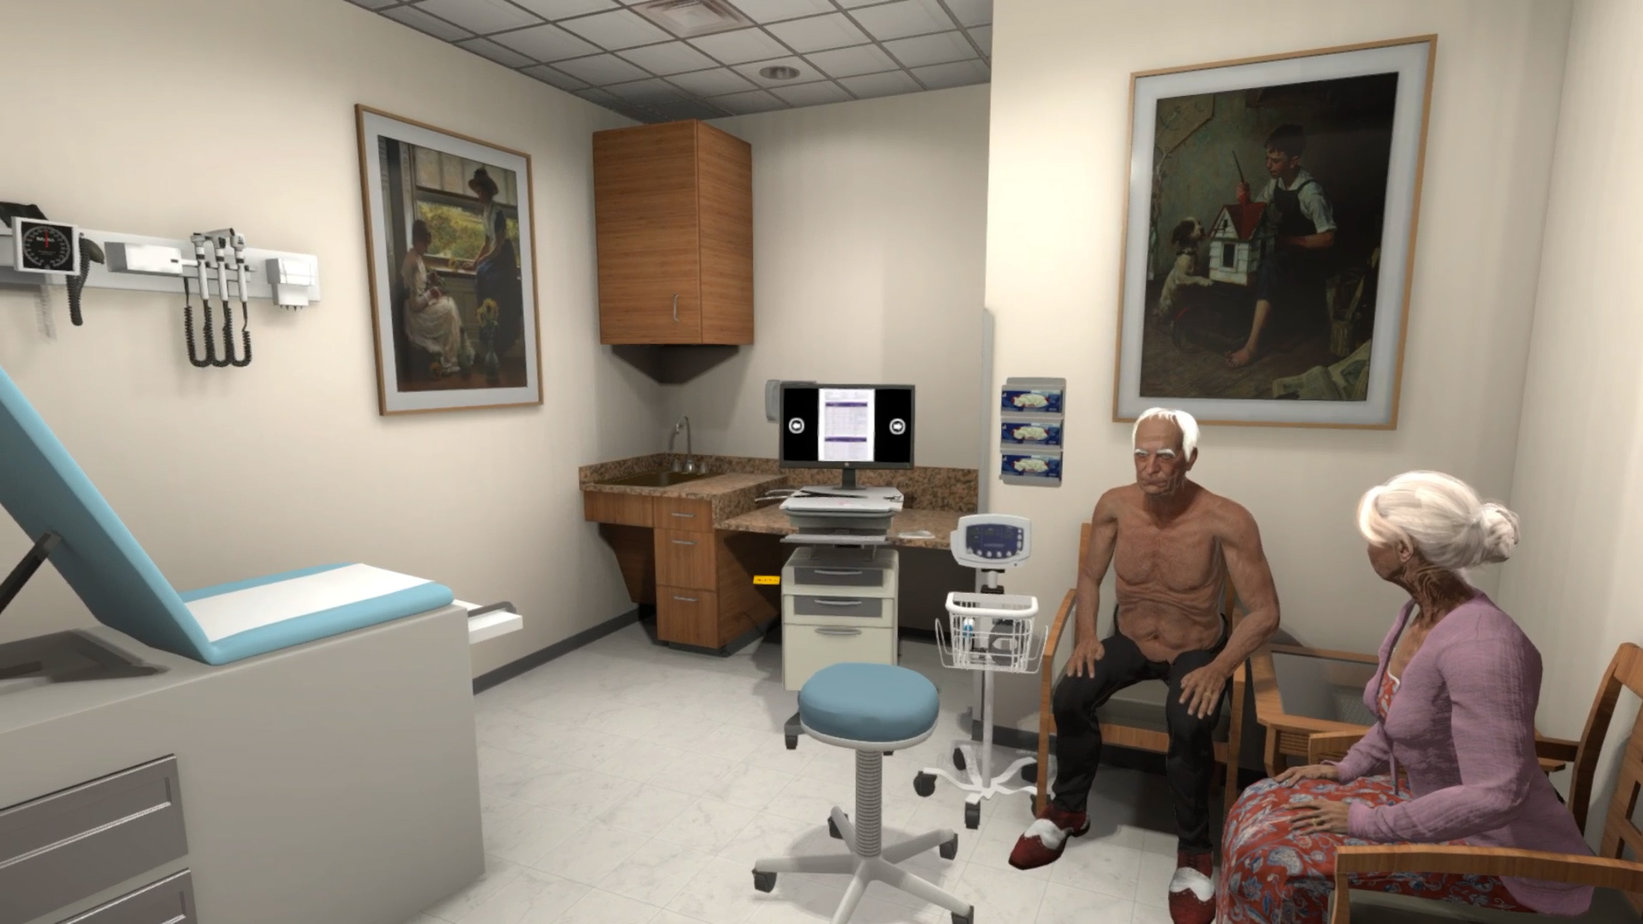 Foley catheter placement VR simulation